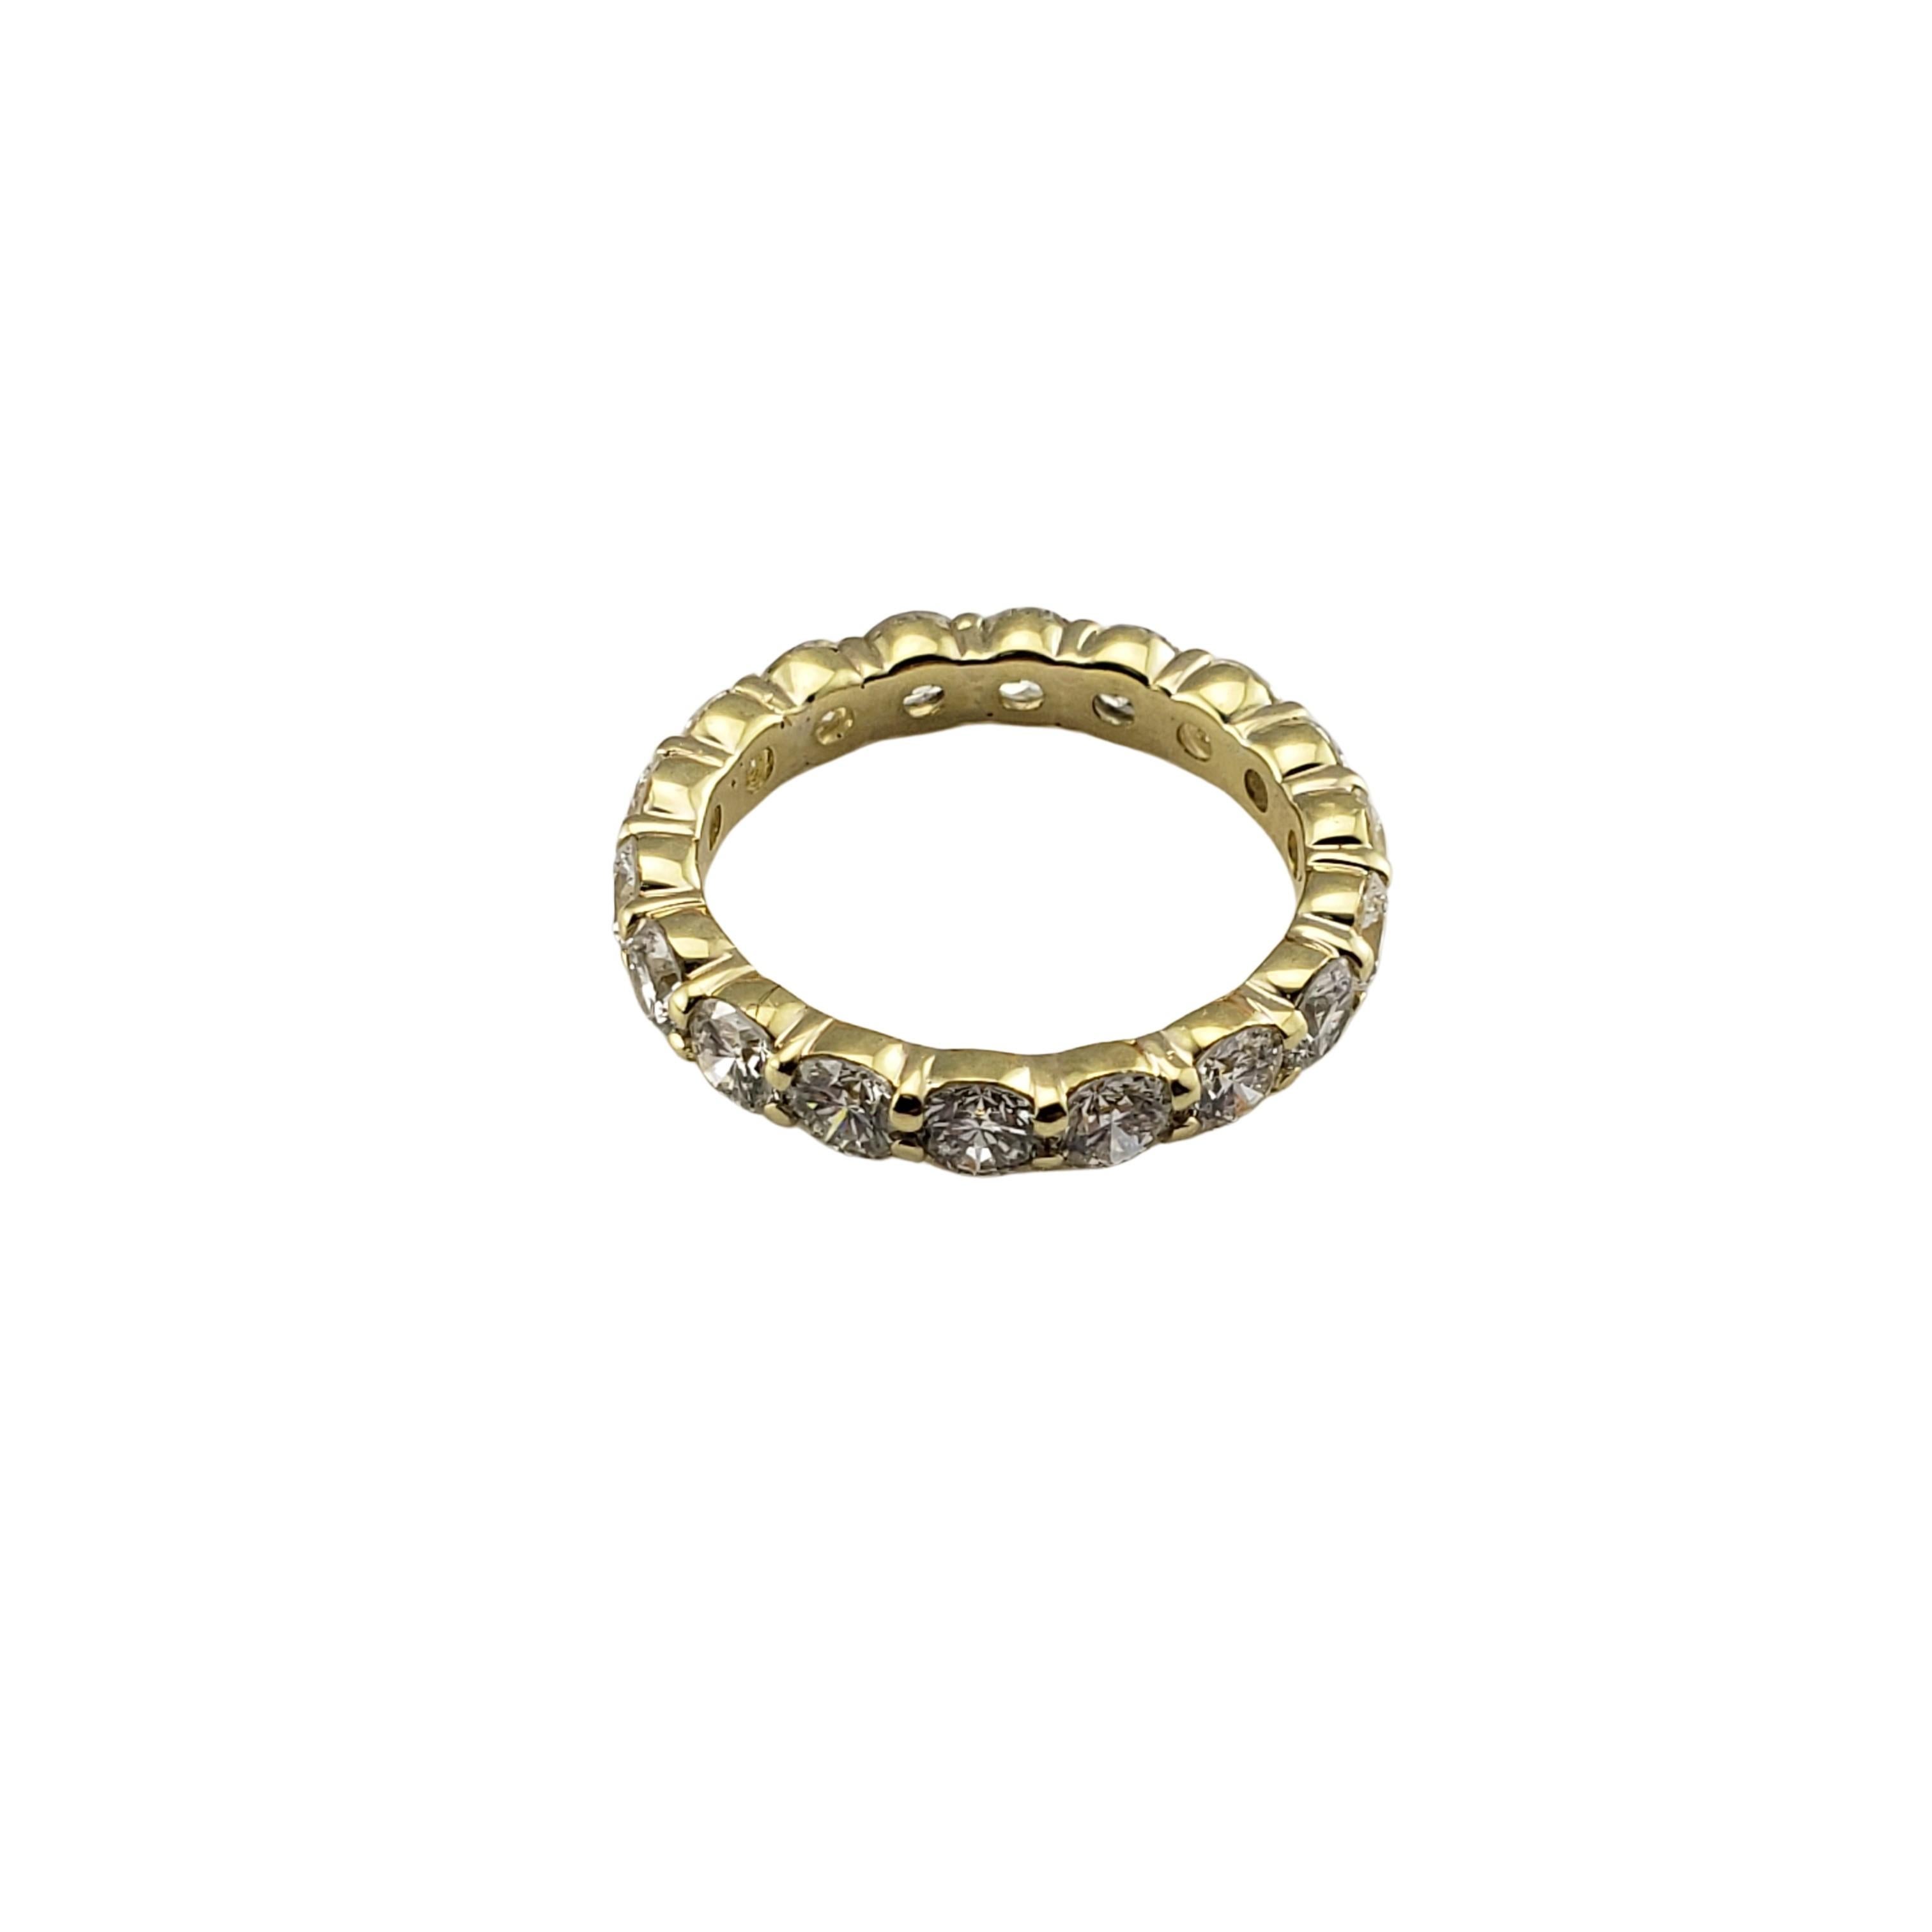 18 Karat Yellow Gold Diamond Eternity Band Ring Size 5.5-

This sparkling eternity band features 18 round brilliant cut diamonds set in classic 18K yellow gold.  Width:  3.5 mm.

Approximate total diamond weight:  2.50 ct.

Diamond color: 